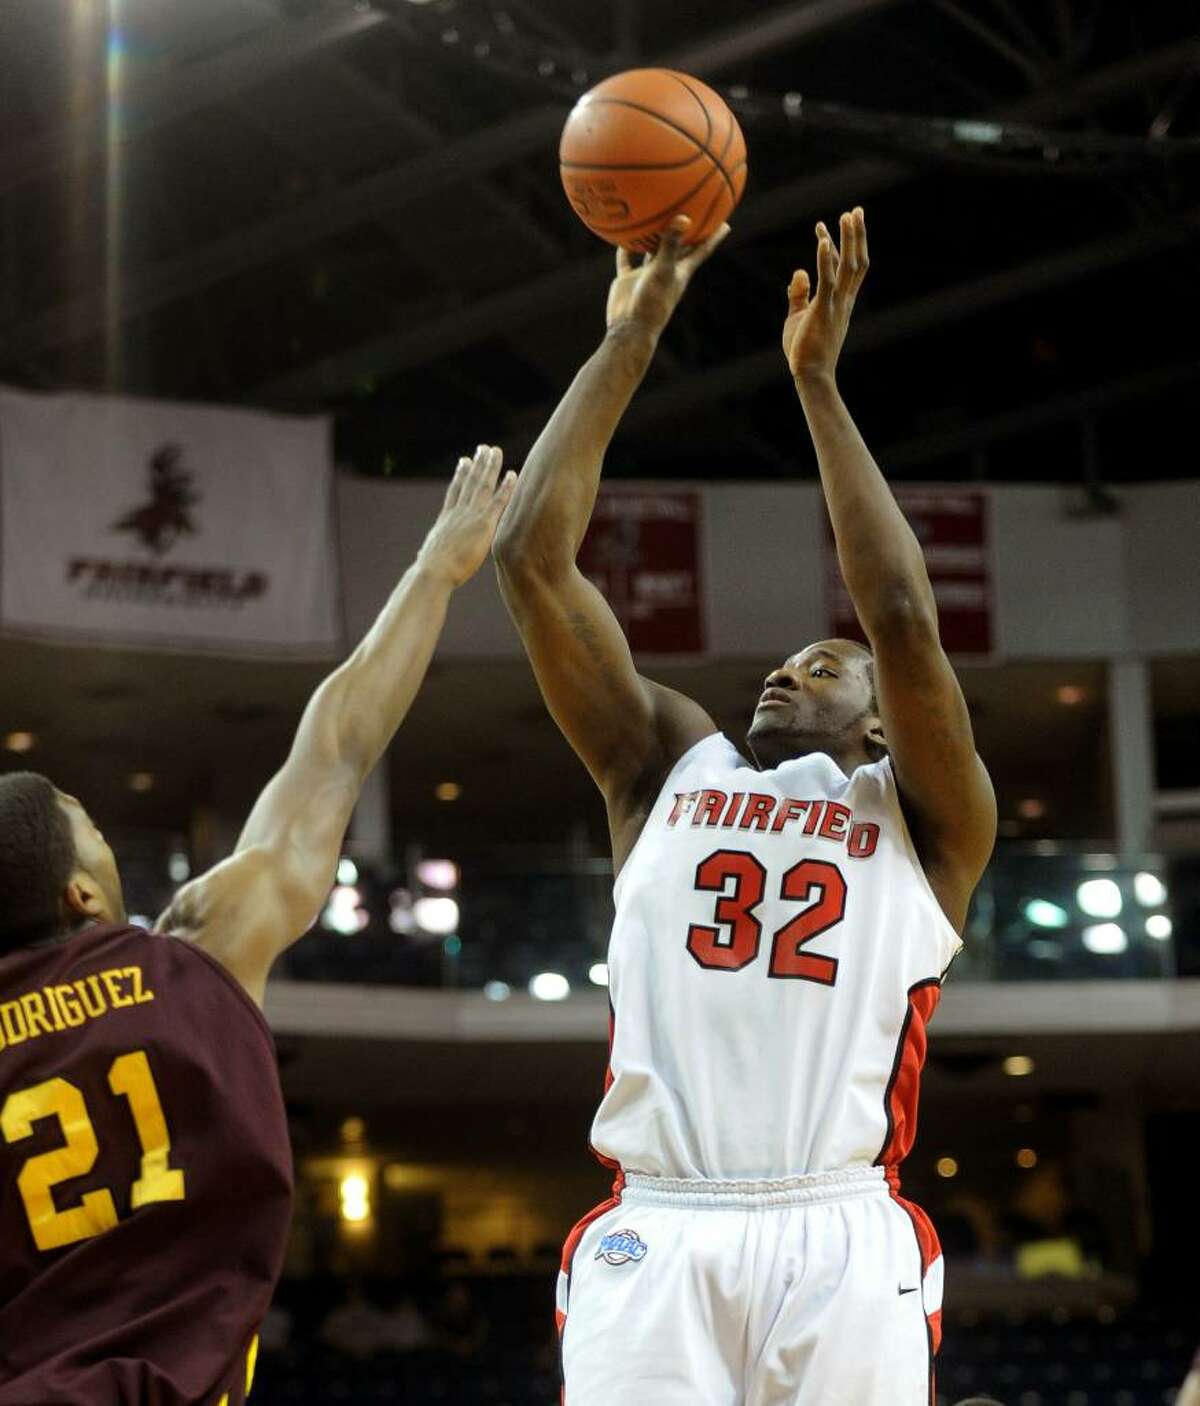 Fairfield University's #32 Anthony Johnson sends the ball to the hoop as Iona's #21 Alejo Rodriguez tries to block, during basketball action at the Arena at Harbor Yard in Bridgeport, Conn. on Friday Feb. 26, 2010.